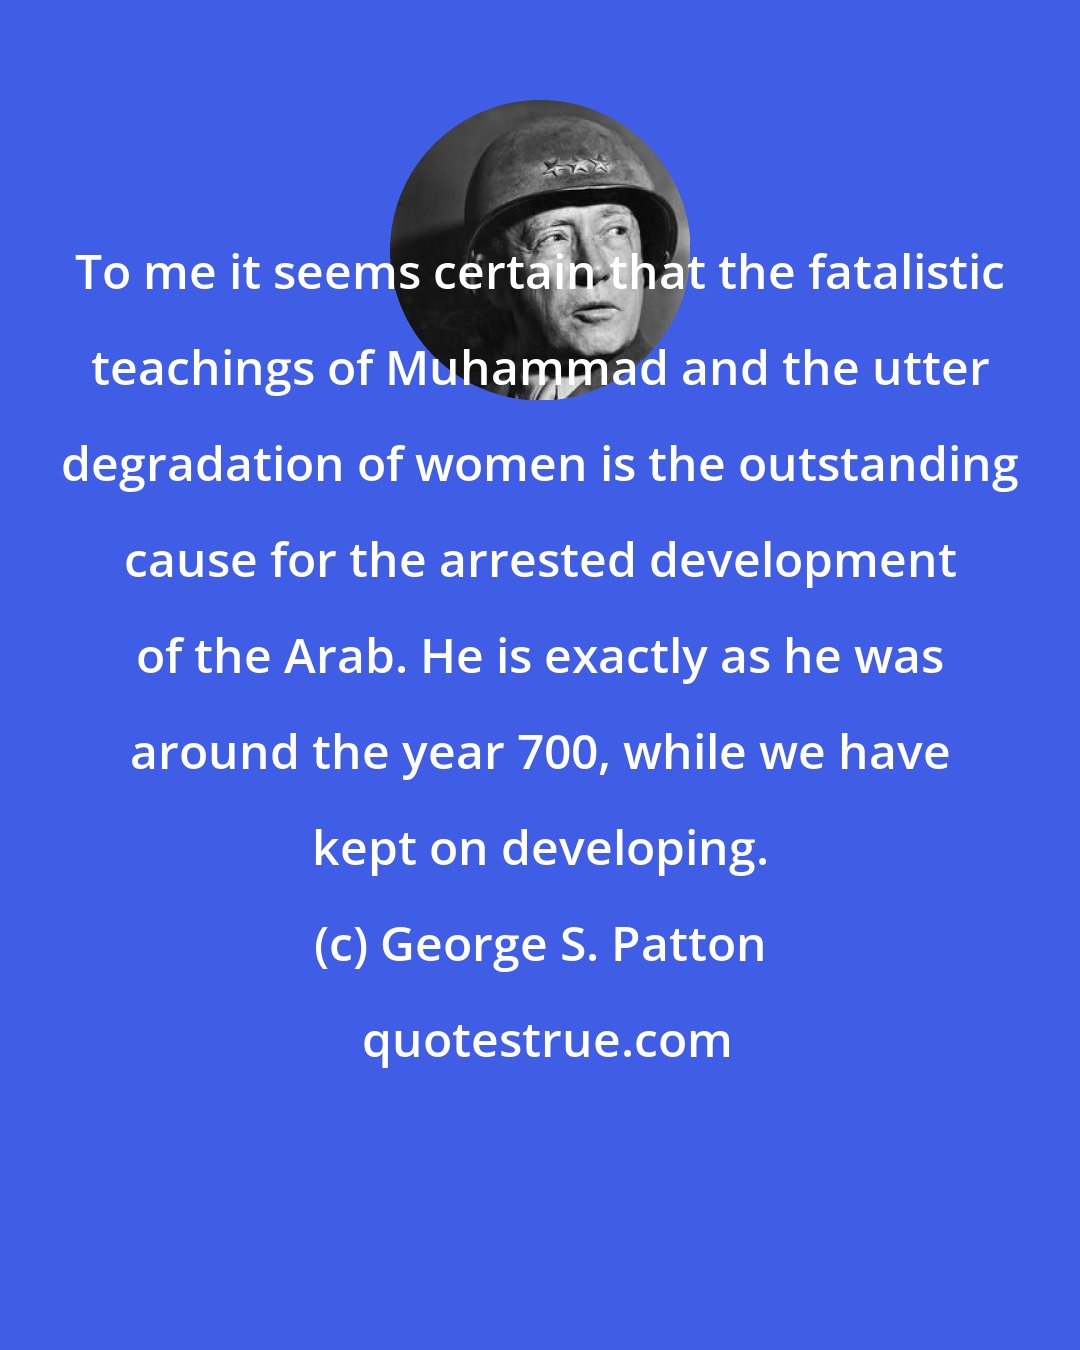 George S. Patton: To me it seems certain that the fatalistic teachings of Muhammad and the utter degradation of women is the outstanding cause for the arrested development of the Arab. He is exactly as he was around the year 700, while we have kept on developing.